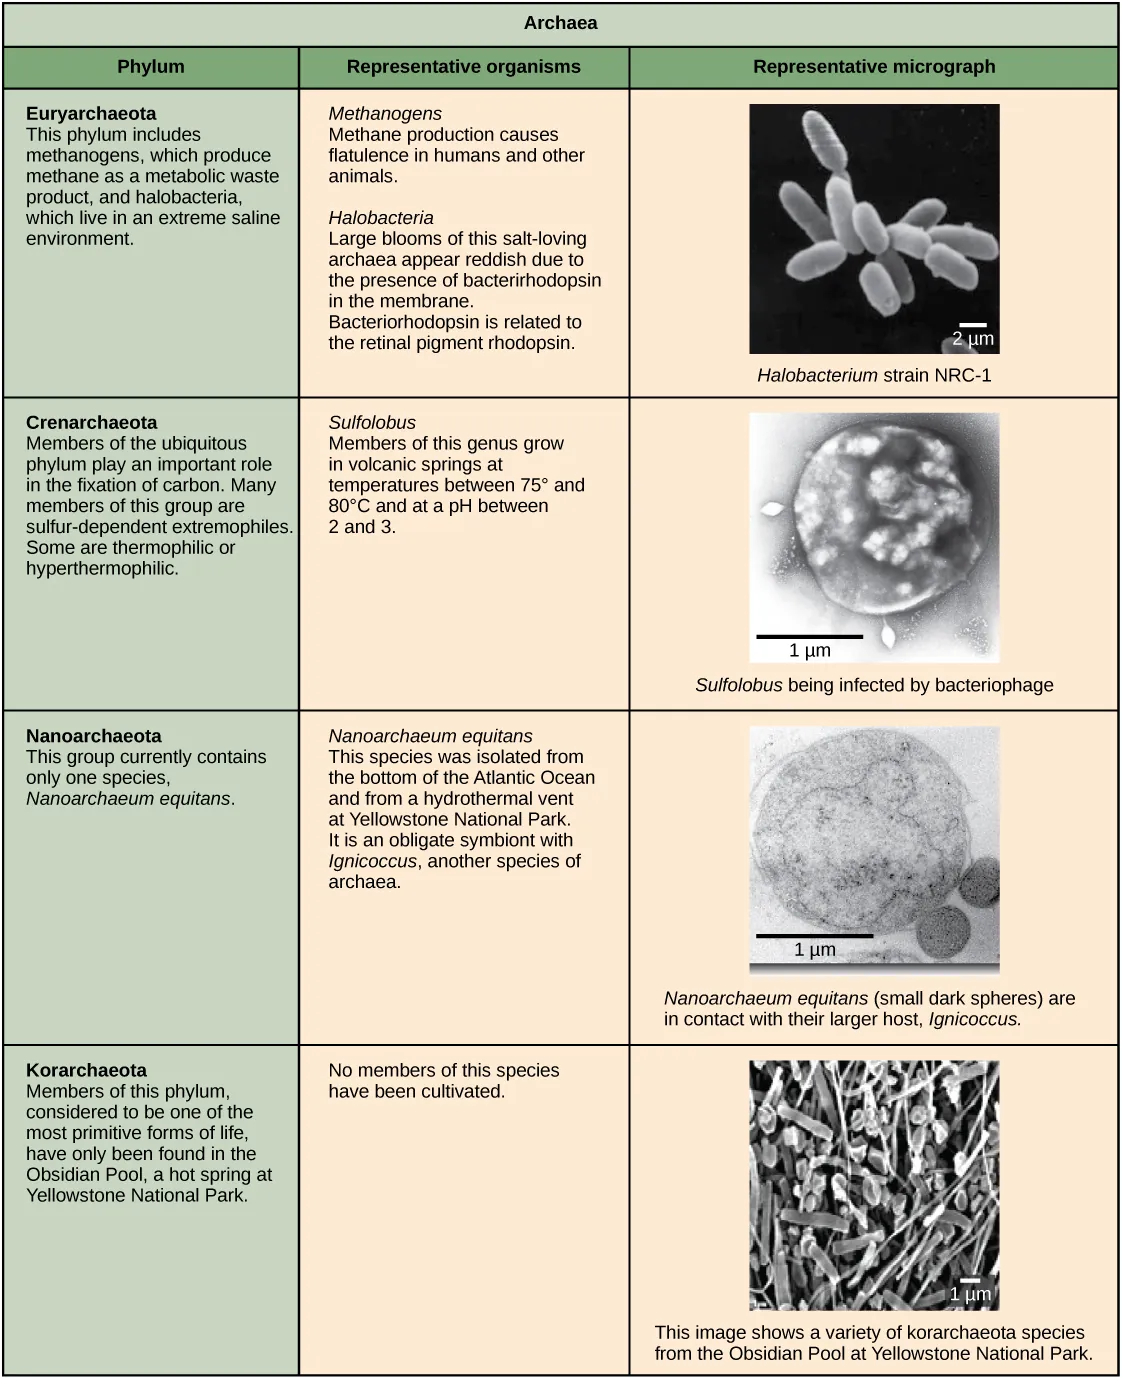 Characteristics of the four phyla of archaea are described. Euryarchaeotes includes methanogens, which produce methane as a metabolic waste product, and halobacteria, which live in an extreme saline environment. Methanogens cause flatulence in humans and other animals. Halobacteria can grow in large blooms that appear reddish, due to the presence of bacterirhodopsin in the membrane. Bacteriorhodopsin is related to the retinal pigment rhodopsin. Micrograph shows rod shaped Halobacterium. Members of the ubiquitous Crenarchaeotes phylum play an important role in the fixation of carbon. Many members of this group are sulfur dependent extremophiles. Some are thermophilic or hyperthermophilic. Micrograph shows cocci shaped Sulfolobus, a genus which grows in volcanic springs at temperatures between 75 degrees and 80 degrees Celsius and at a lower case p upper case H between 2 and 3. The phylum Nanoarchaeotes currently contains only one species, Nanoarchaeum equitans, which has been isolated from the bottom of the Atlantic Ocean, and from the a hydrothermal vent at Yellowstone National Park. It is an obligate symbiont with Ignococcus, another species of archaebacteria. Micrograph shows two small, round N. equitans cells attached to a larger Ignococcus cell. Korarchaeotes are considered to be one of the most primitive forms of life and so far have only been found in the Obsidian Pool, a hot spring at Yellowstone National Park. Micrograph shows a variety of specimens from this group which vary in shape.